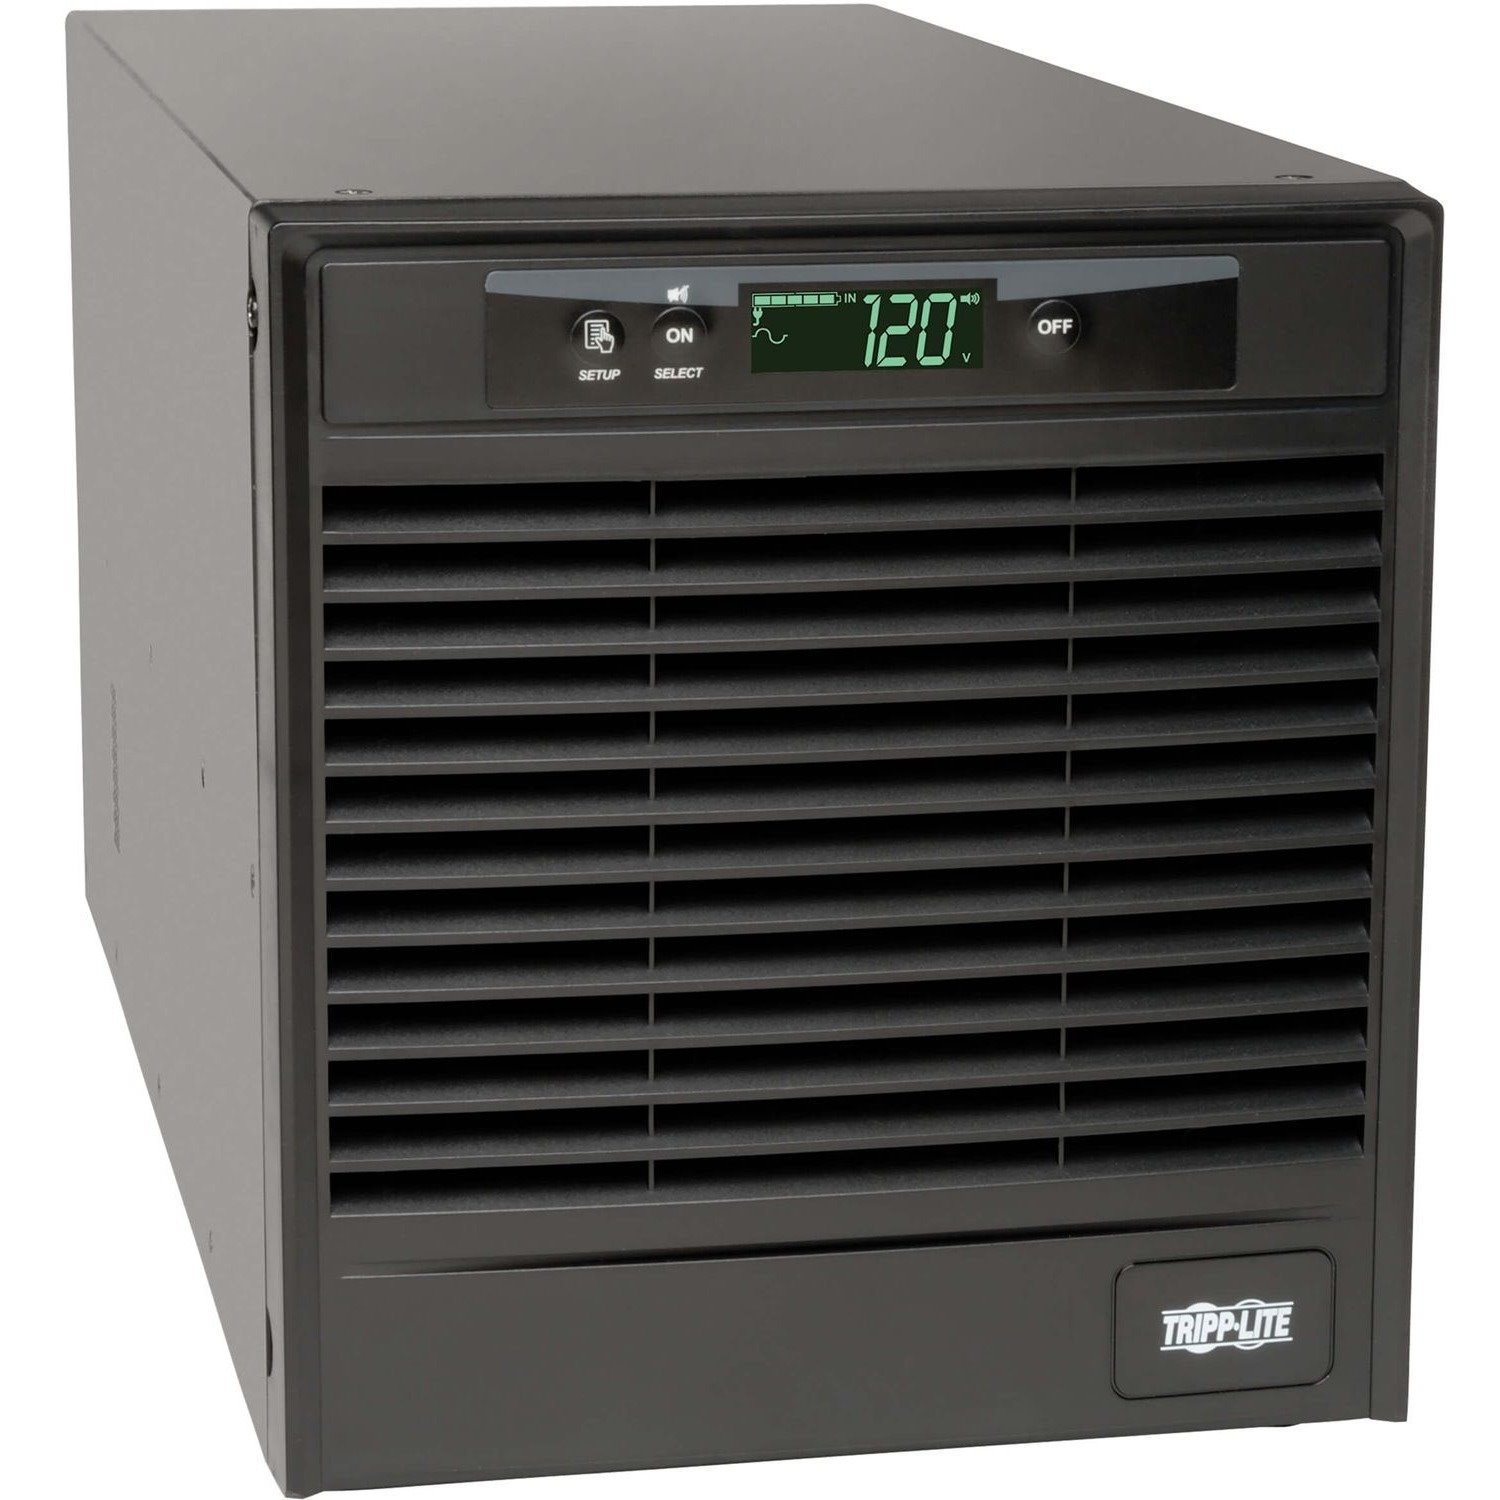 Eaton Tripp Lite Series SmartOnline 1500VA 1350W 120V Double-Conversion UPS - 6 Outlets, Extended Run, Network Card Option, LCD, USB, DB9, Tower